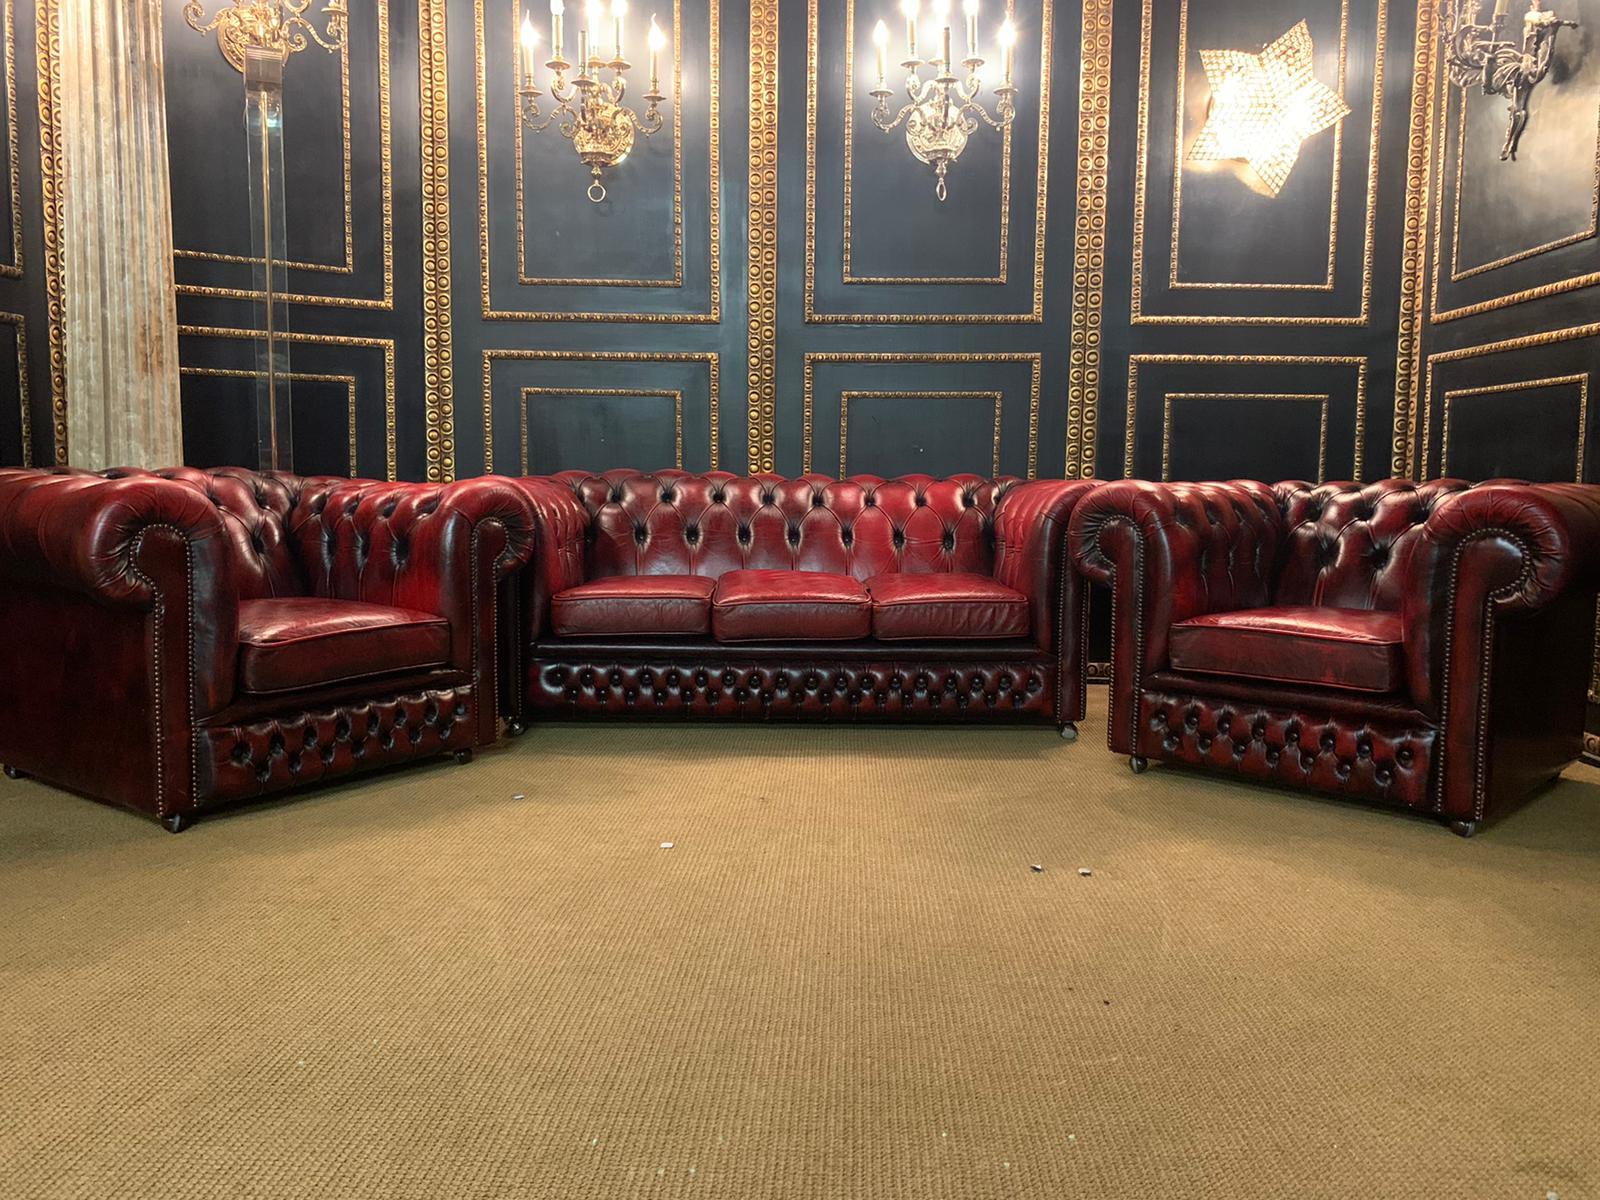 Original old Chesterfield set, quilted back strong leather.
Color is faded red braun Bordeaux,
seats are with classic laced feather floor. Fantastic condition vintage, no cracks unique patina. Do not miss this unique opportunity.
The armchairs